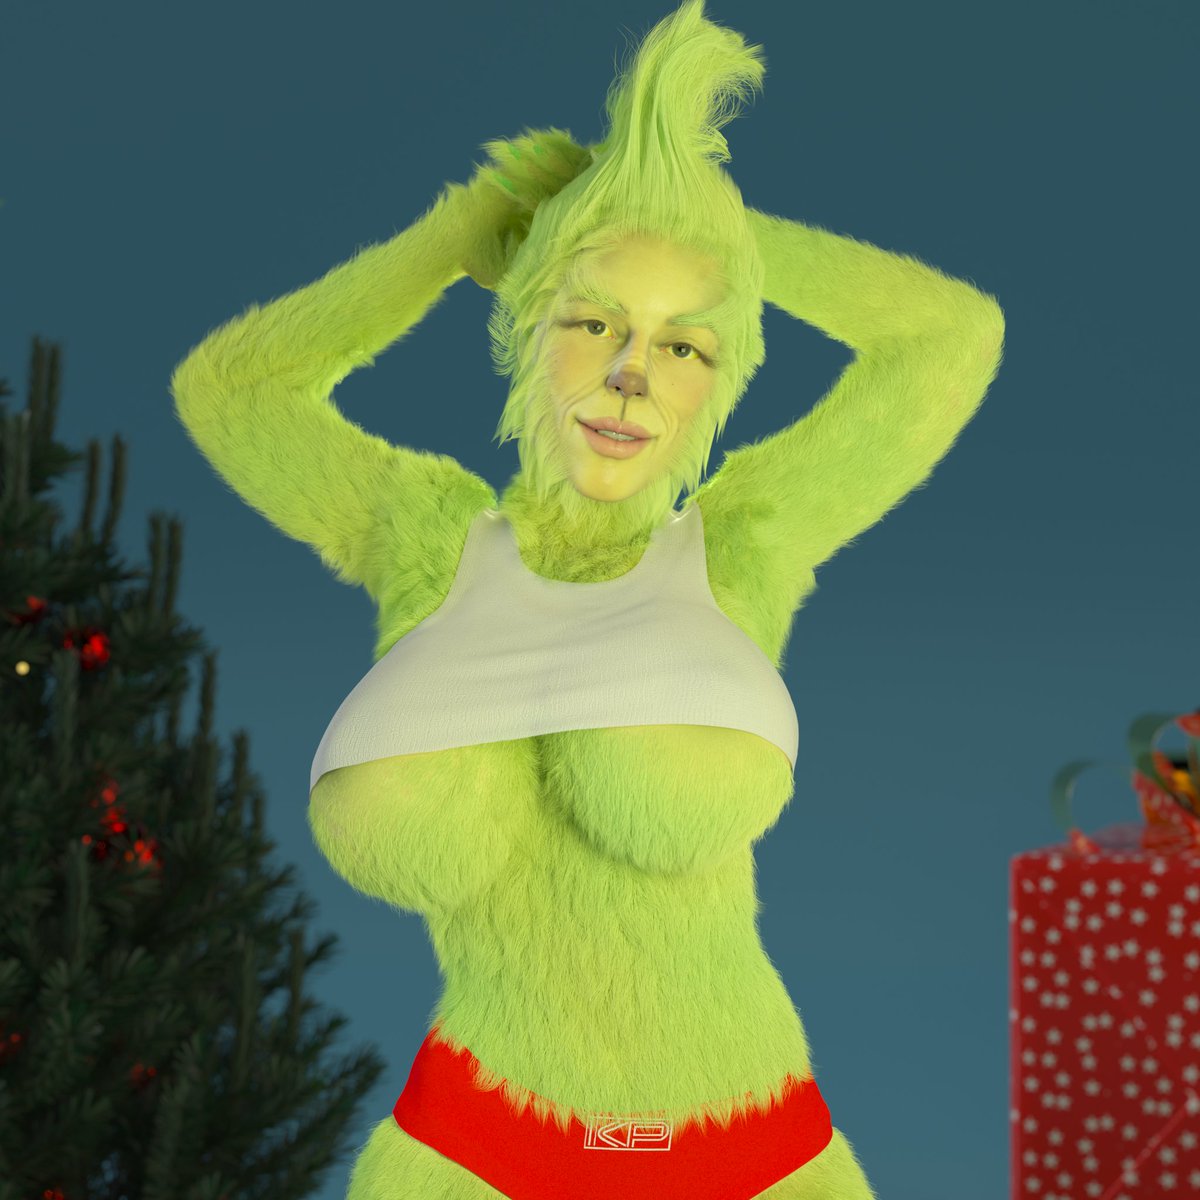 Last year we made this sexy grinch version of King Princess as a xmas gift ...